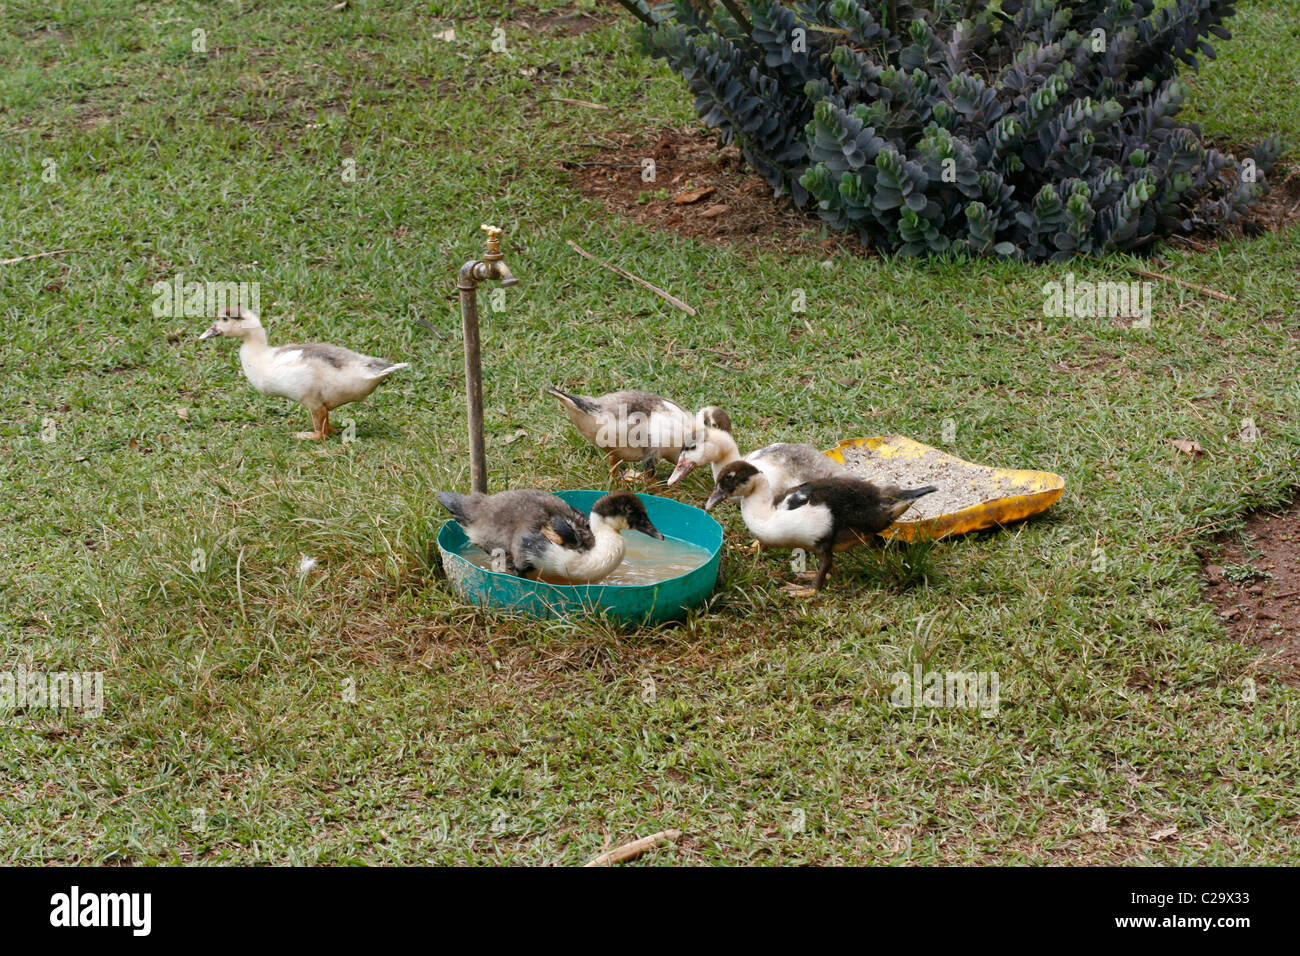 Muscovy ducklings (Cairina moschata) feeding and drinking Stock Photo